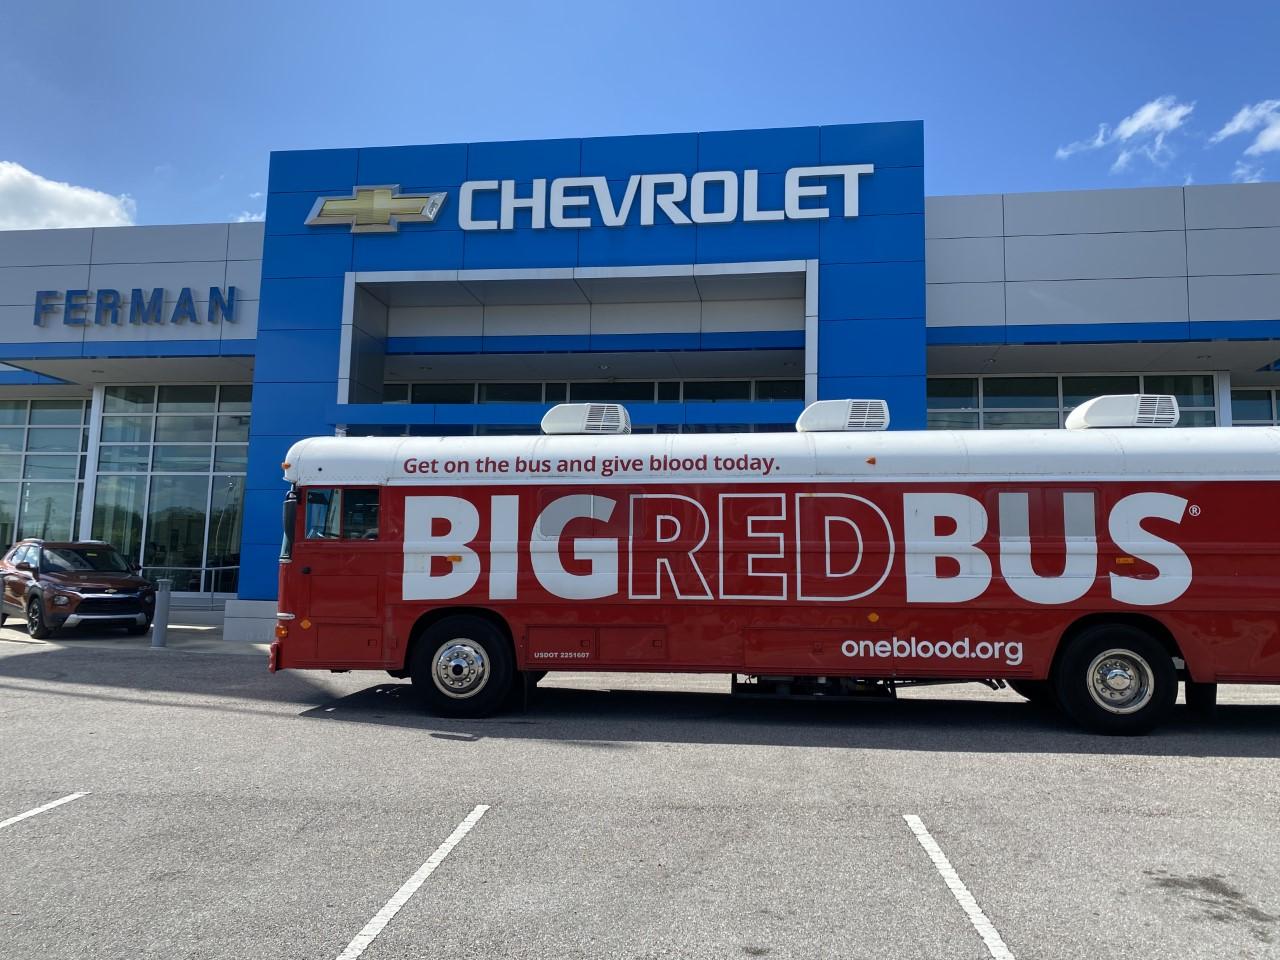 Give Blood today on the big red bus | oneblood.org | at Ferman Chevrolet of Tarpon Springs